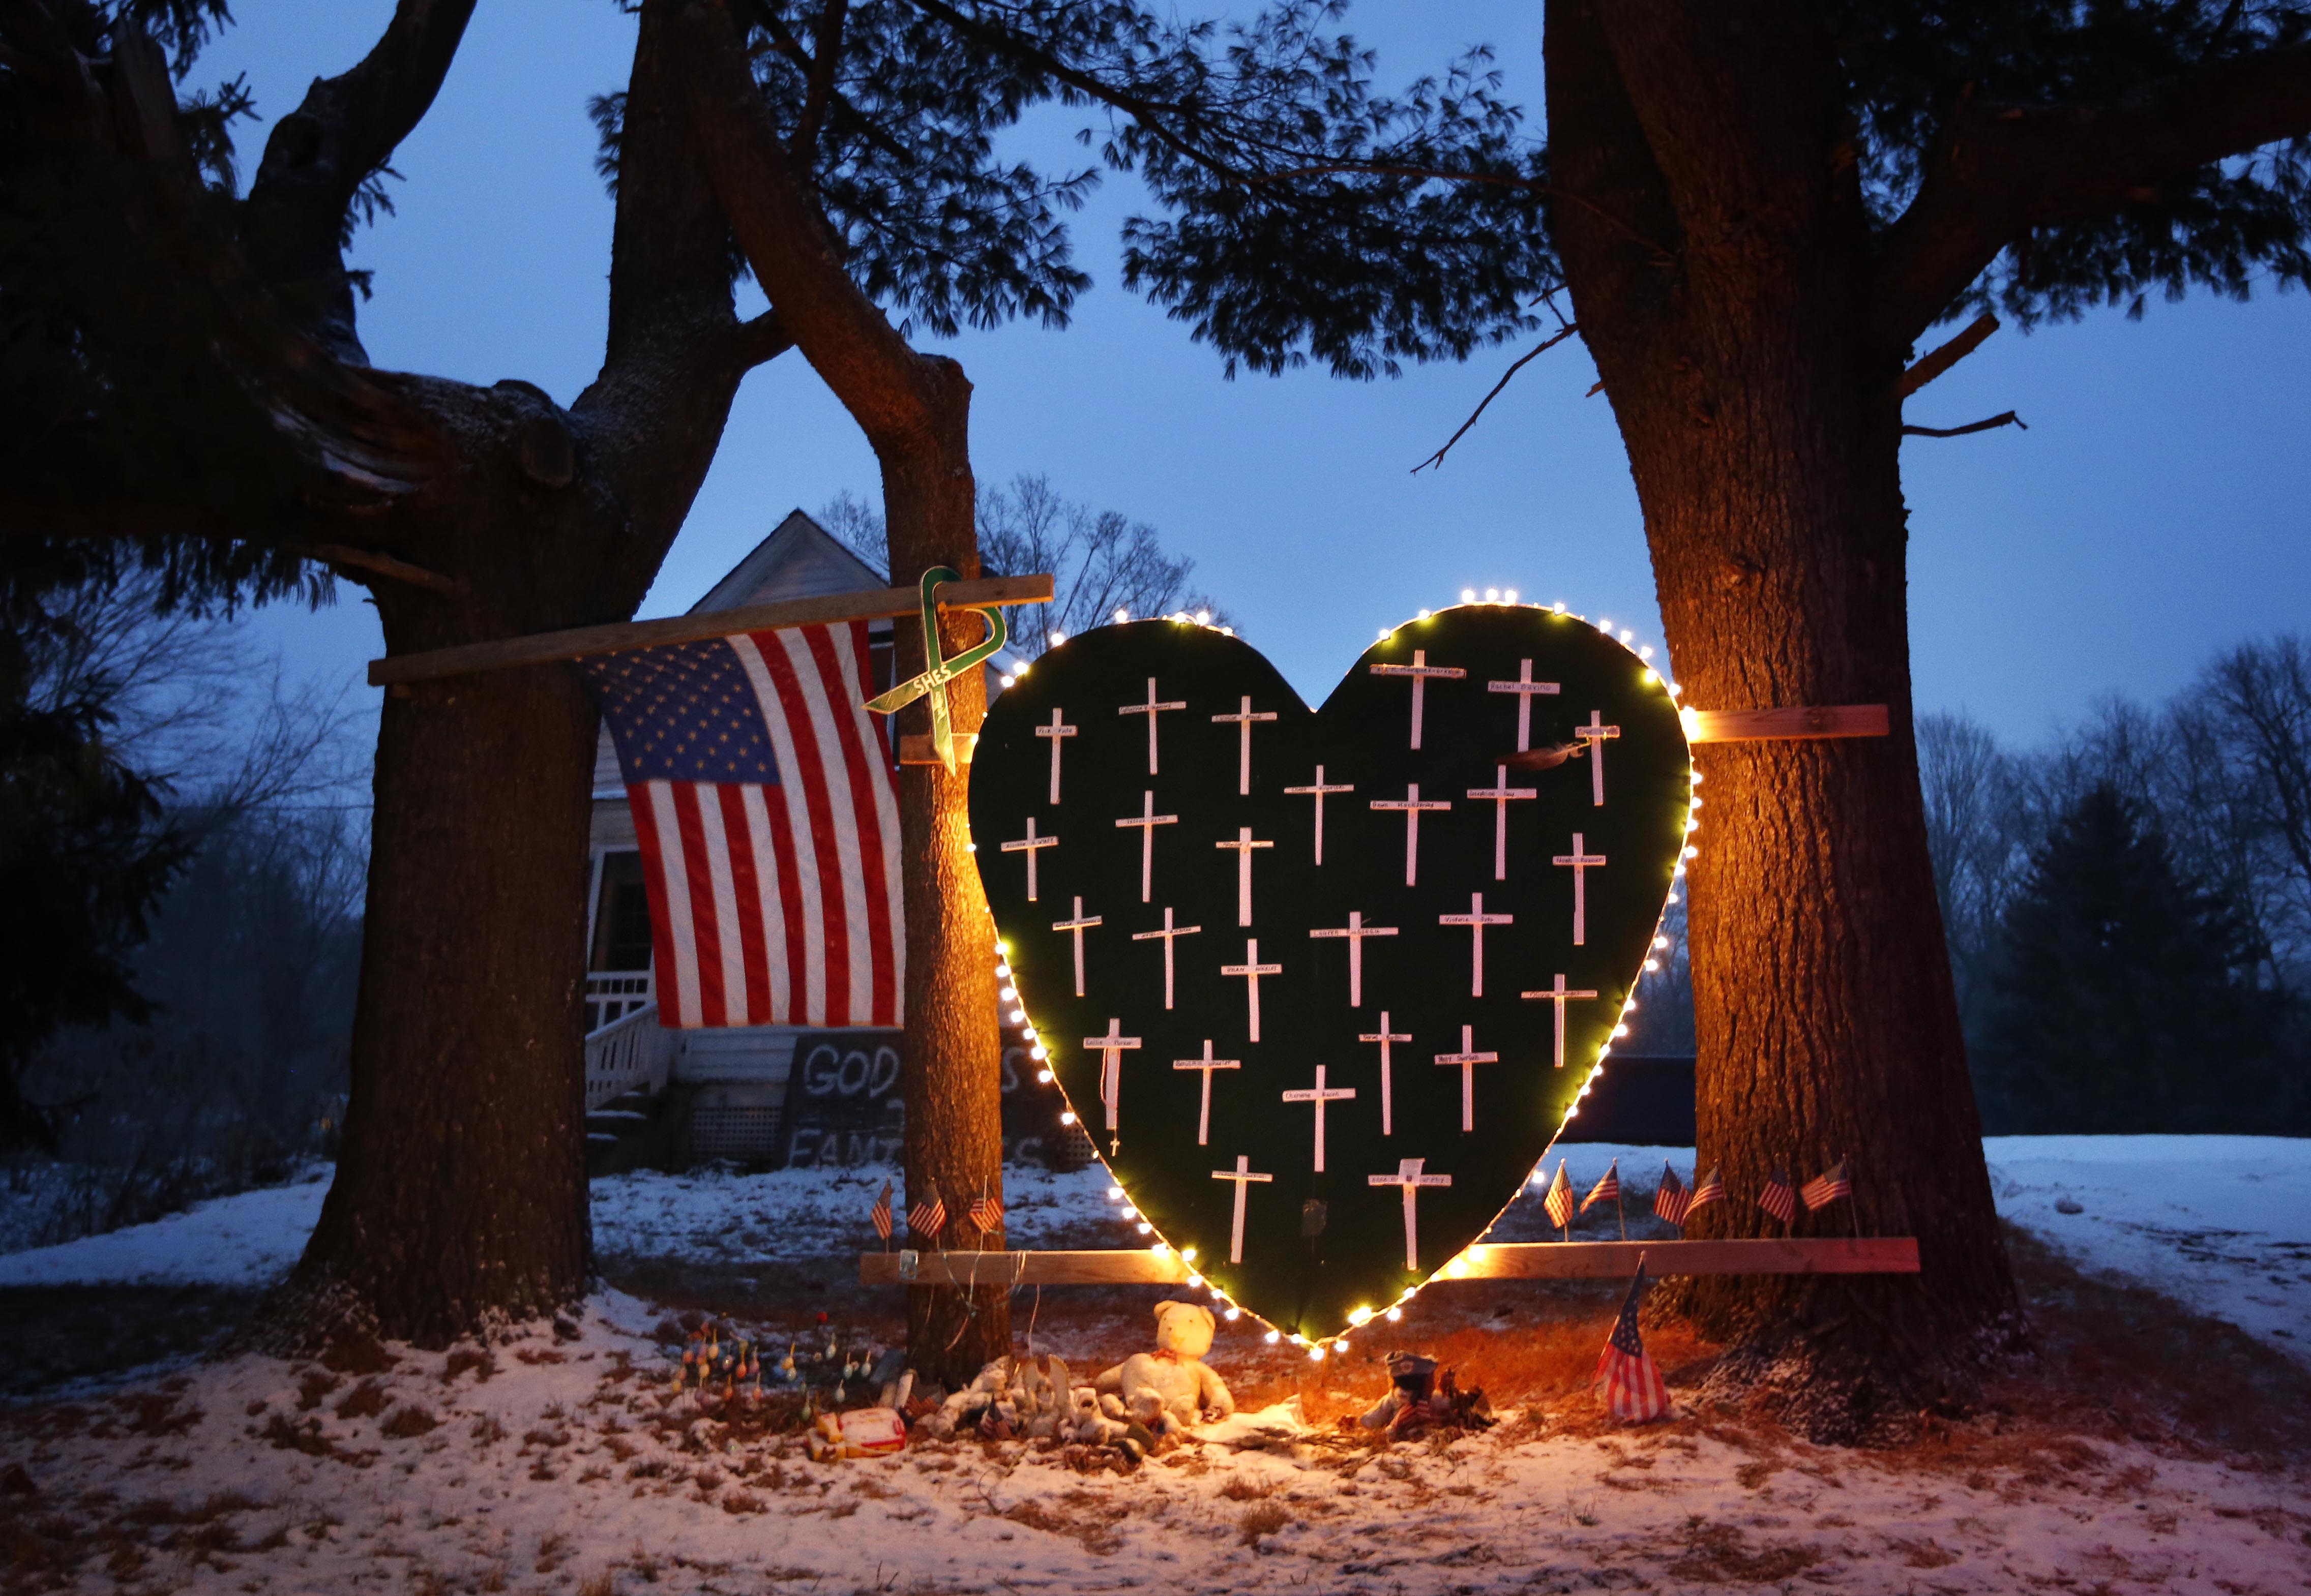 A makeshift memorial with crosses for the victims of the Sandy Hook massacre stands outside a home in Newtown, Conn., on Dec. 14, 2013, the one-year anniversary of the shootings.